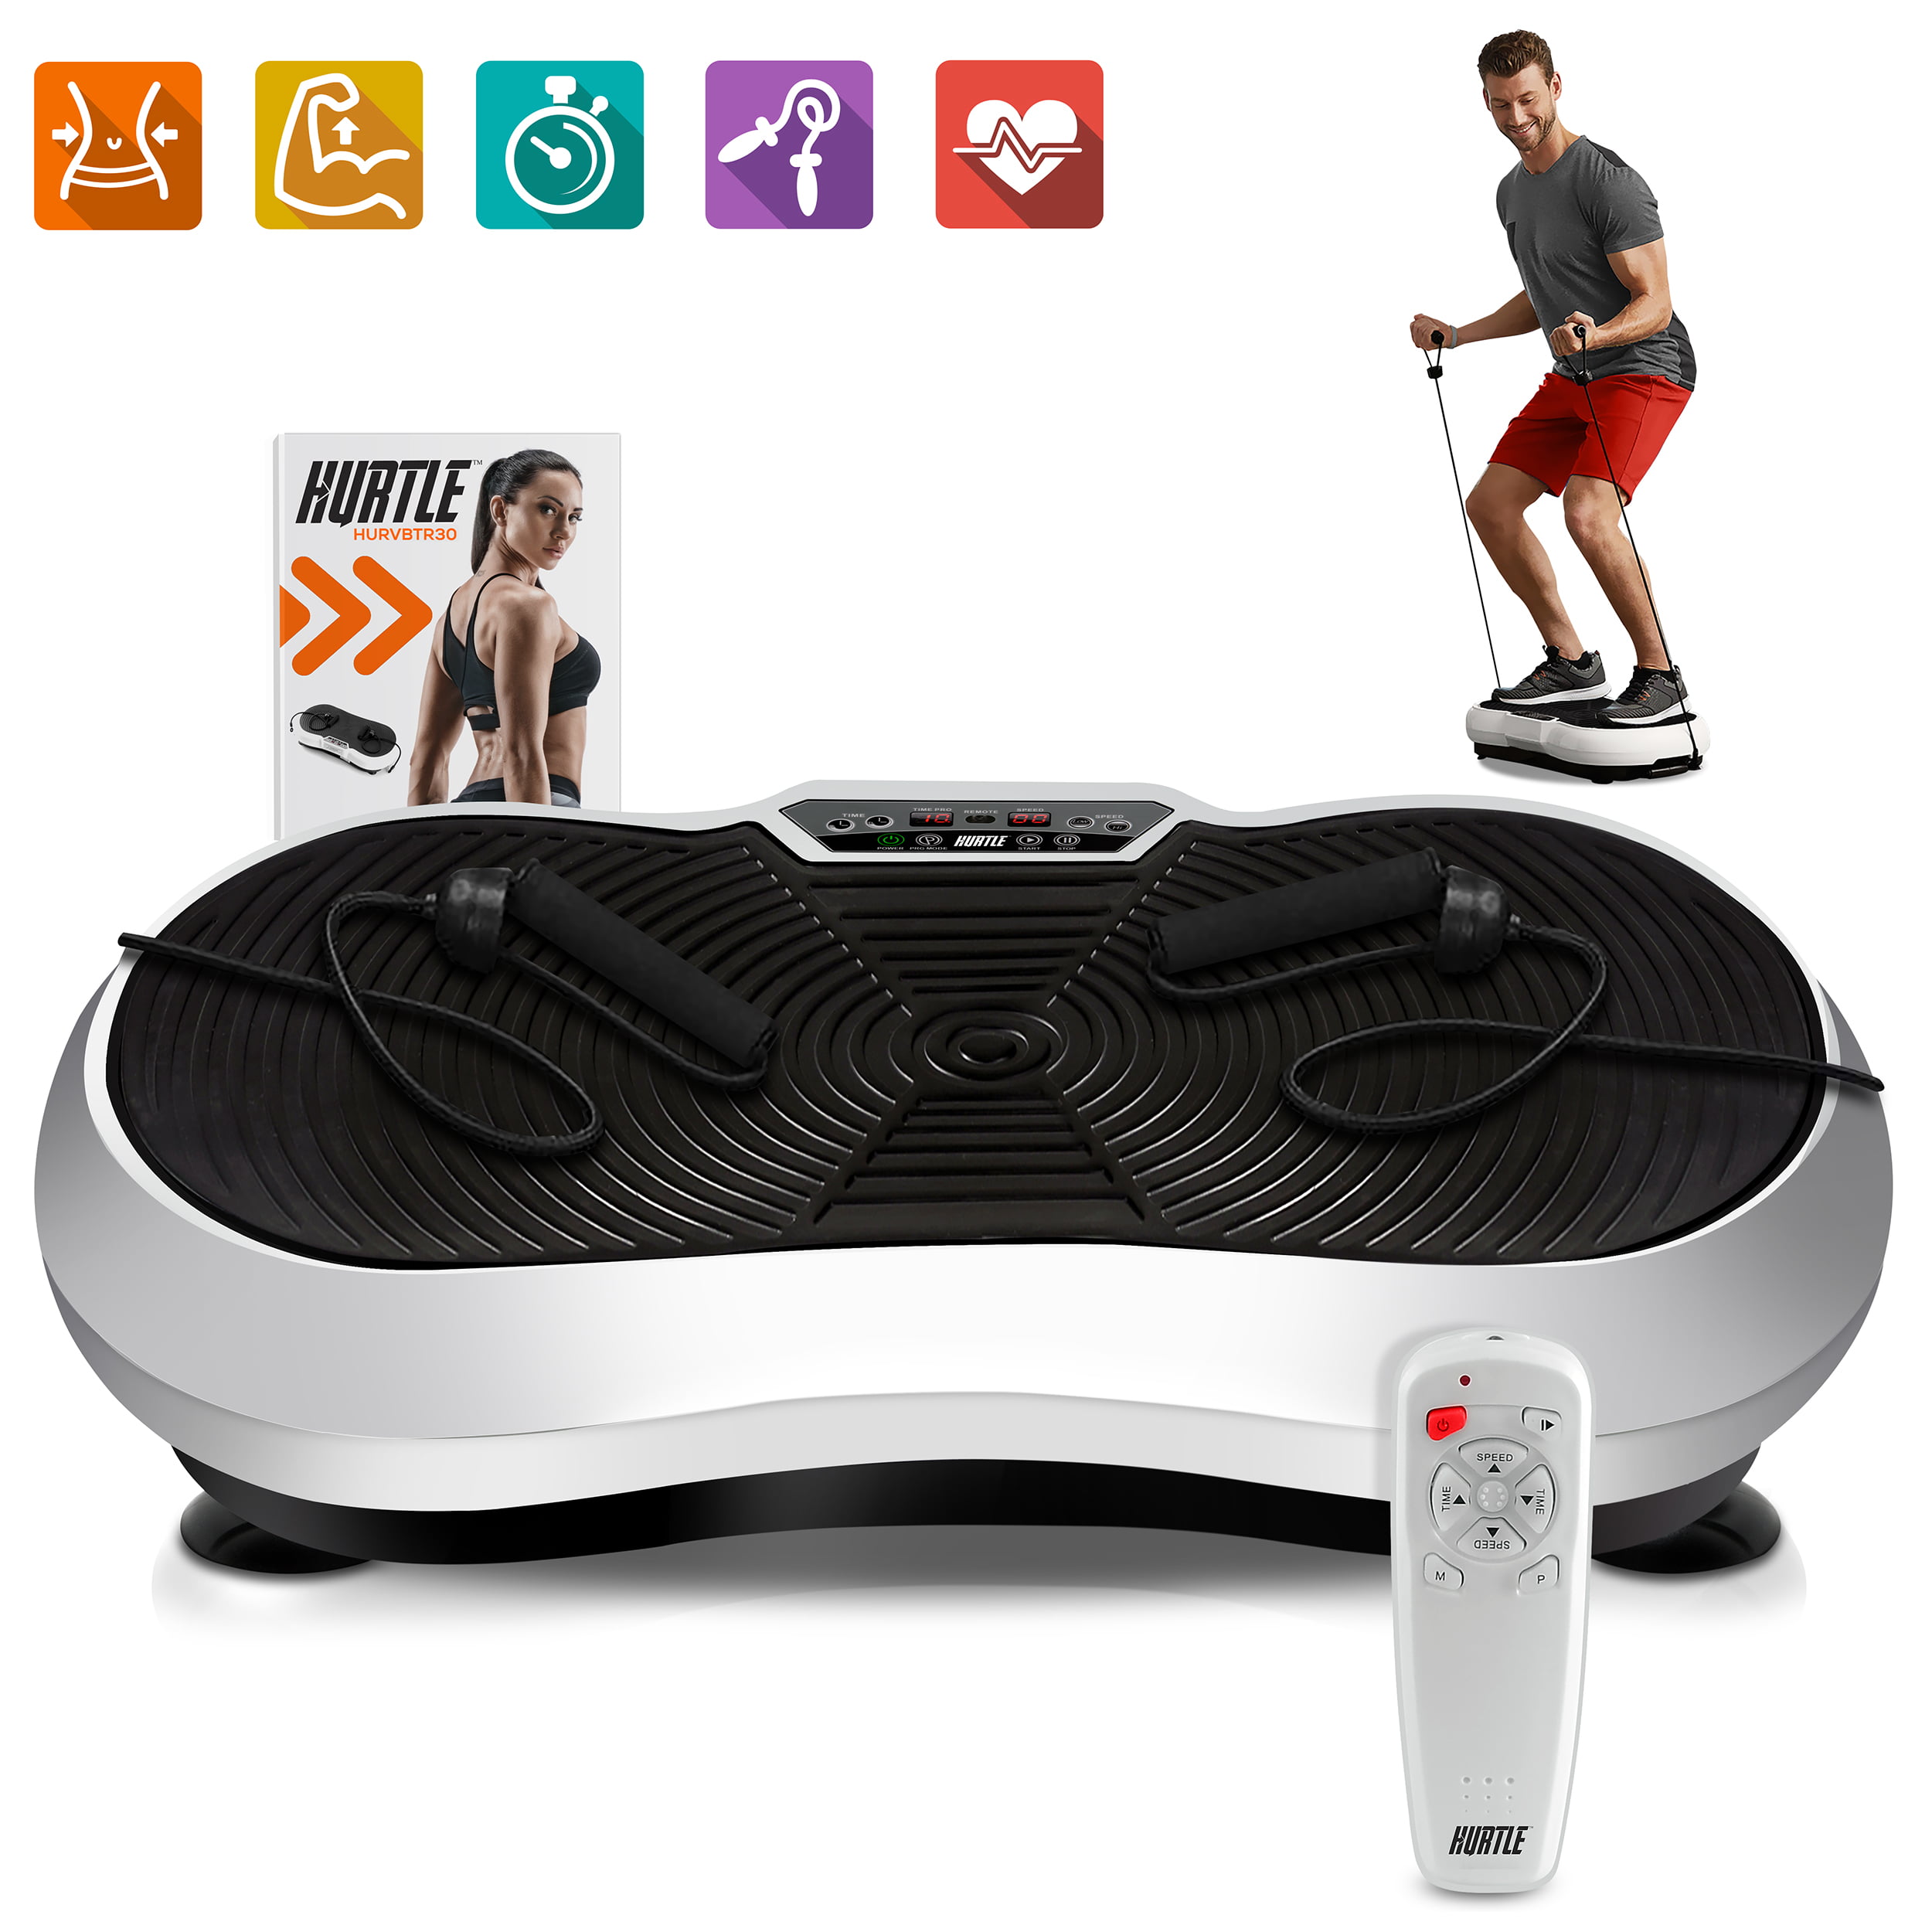 iDeer Vibration Platform Fitness Vibration Plates,Whole Body Vibration Exercise Machine w/Remote Control &Bands,Fit Massage Workout Vibration Trainer for Weight.Loss Max User Weight 330lbs.